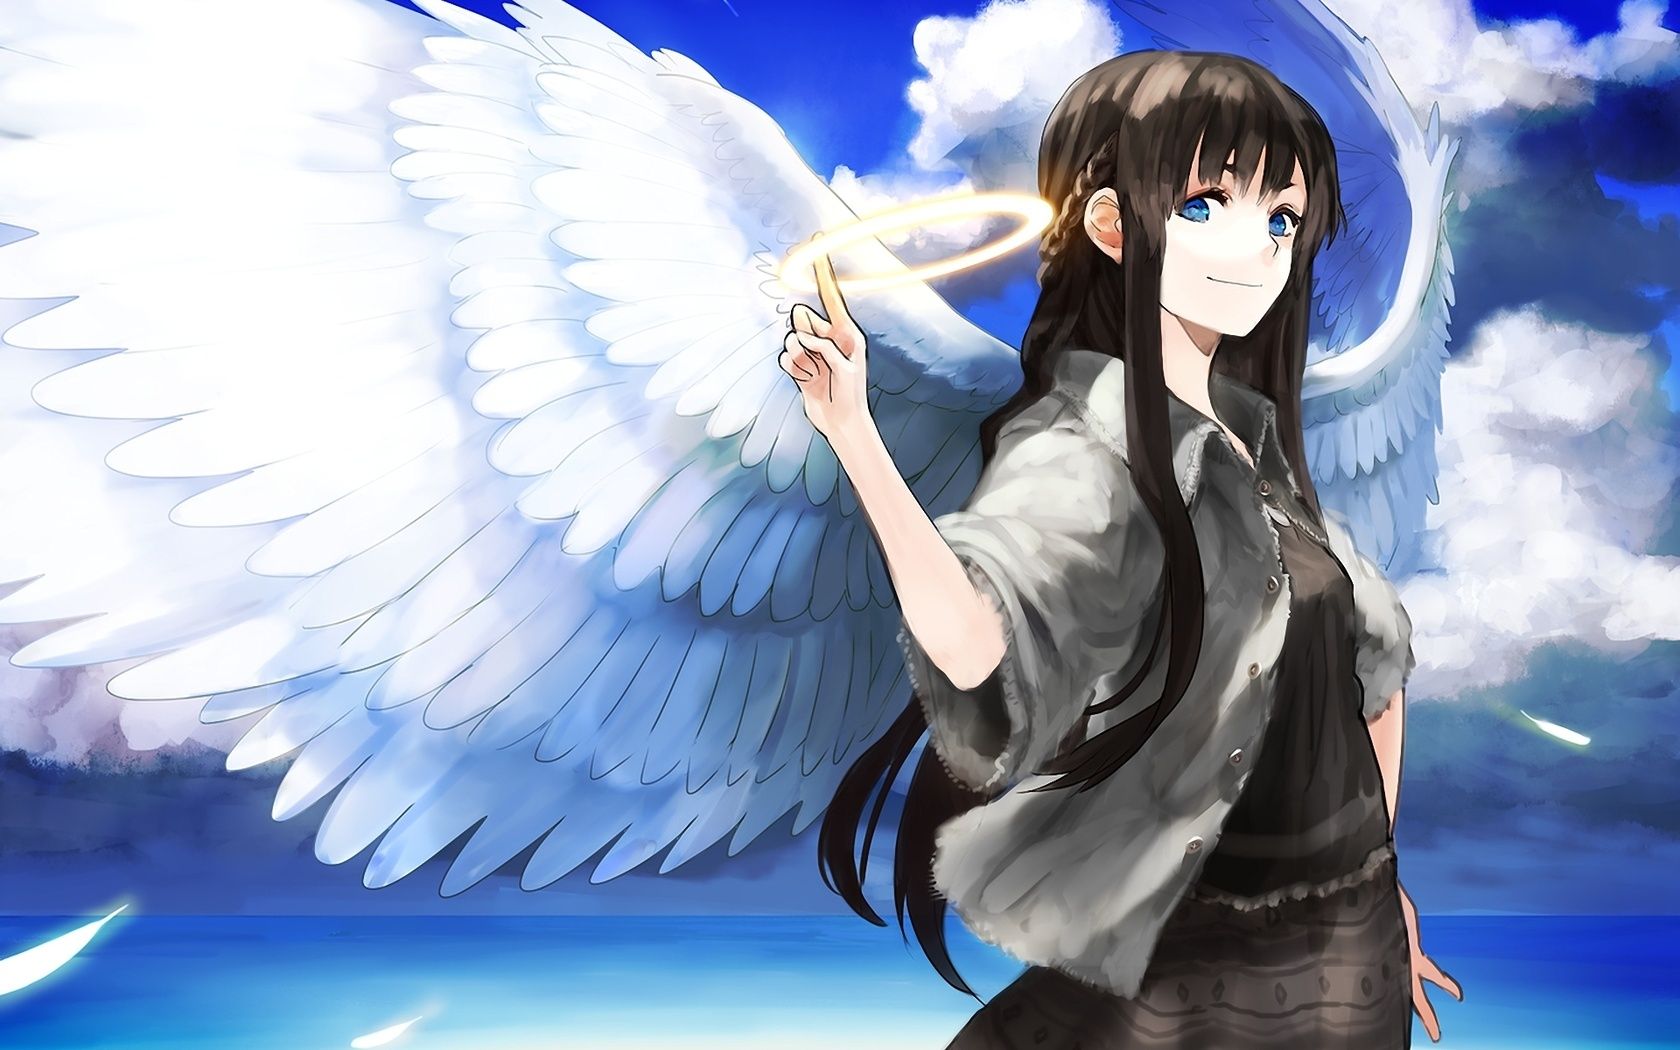 Cute Angel Anime Girl Wallpapers Wallpapers